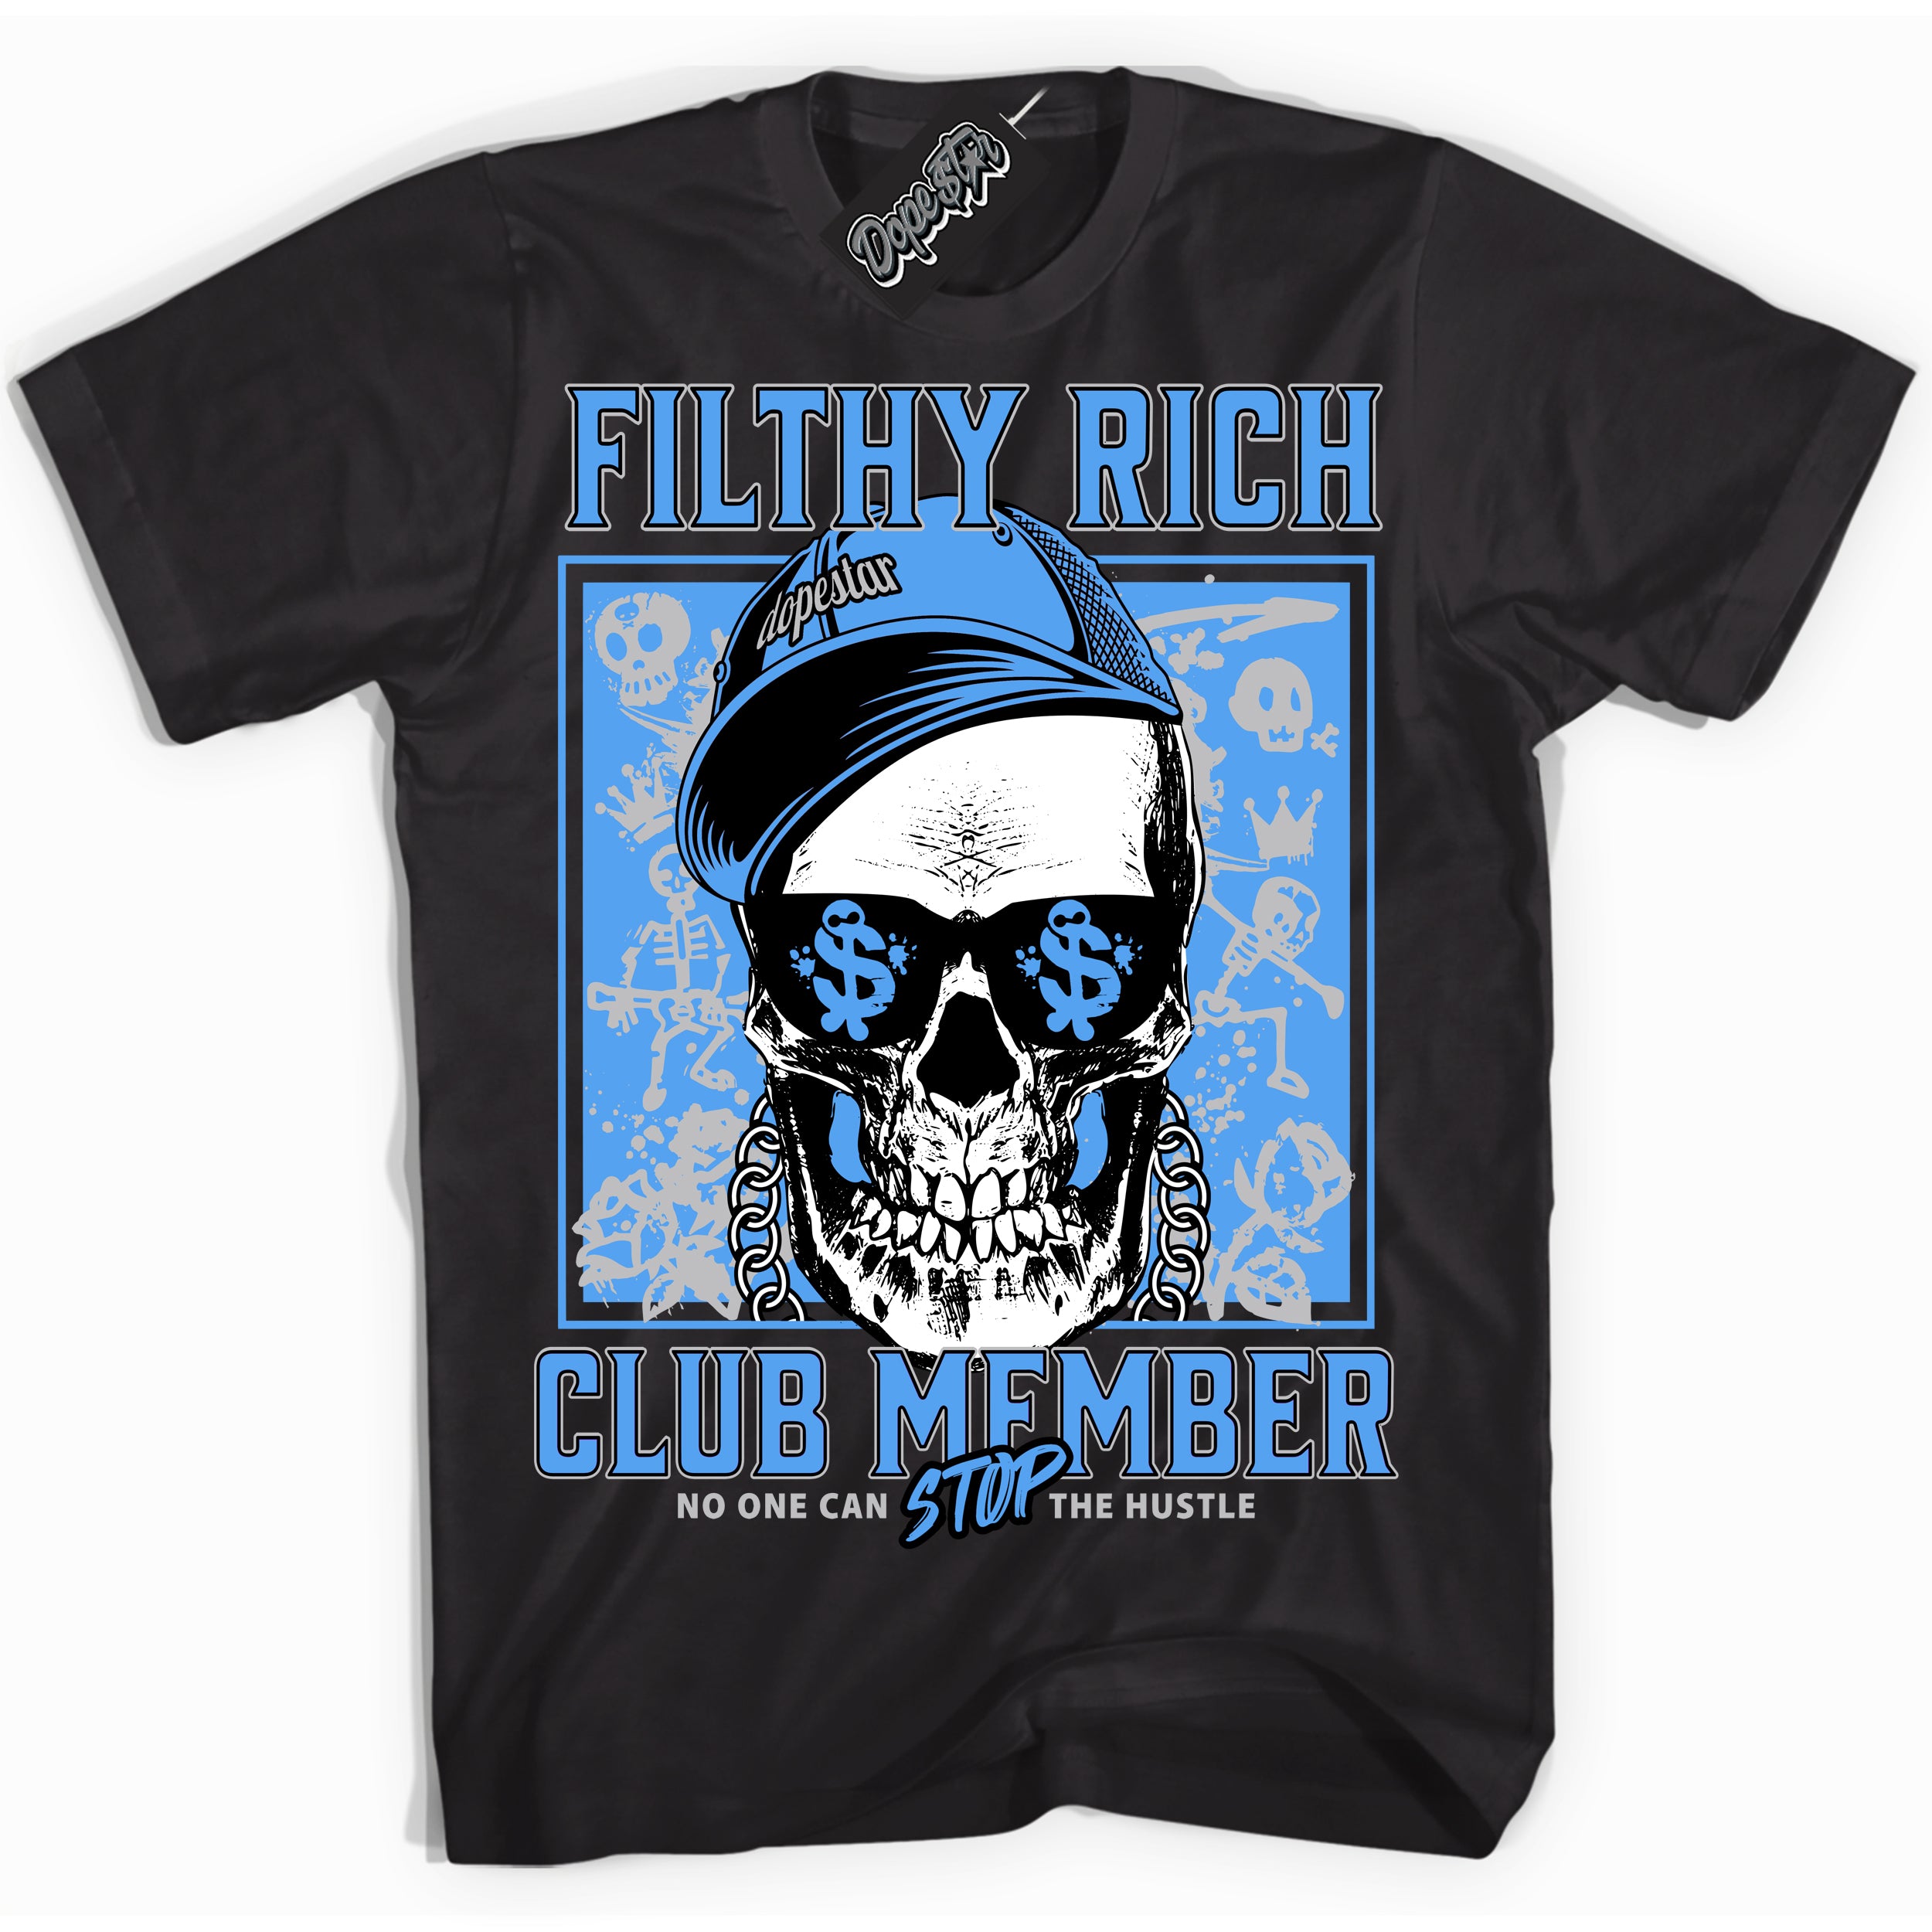 Cool Black Shirt with “ Filthy Rich” design that perfectly matches UNC University Blue 5s Sneakers.